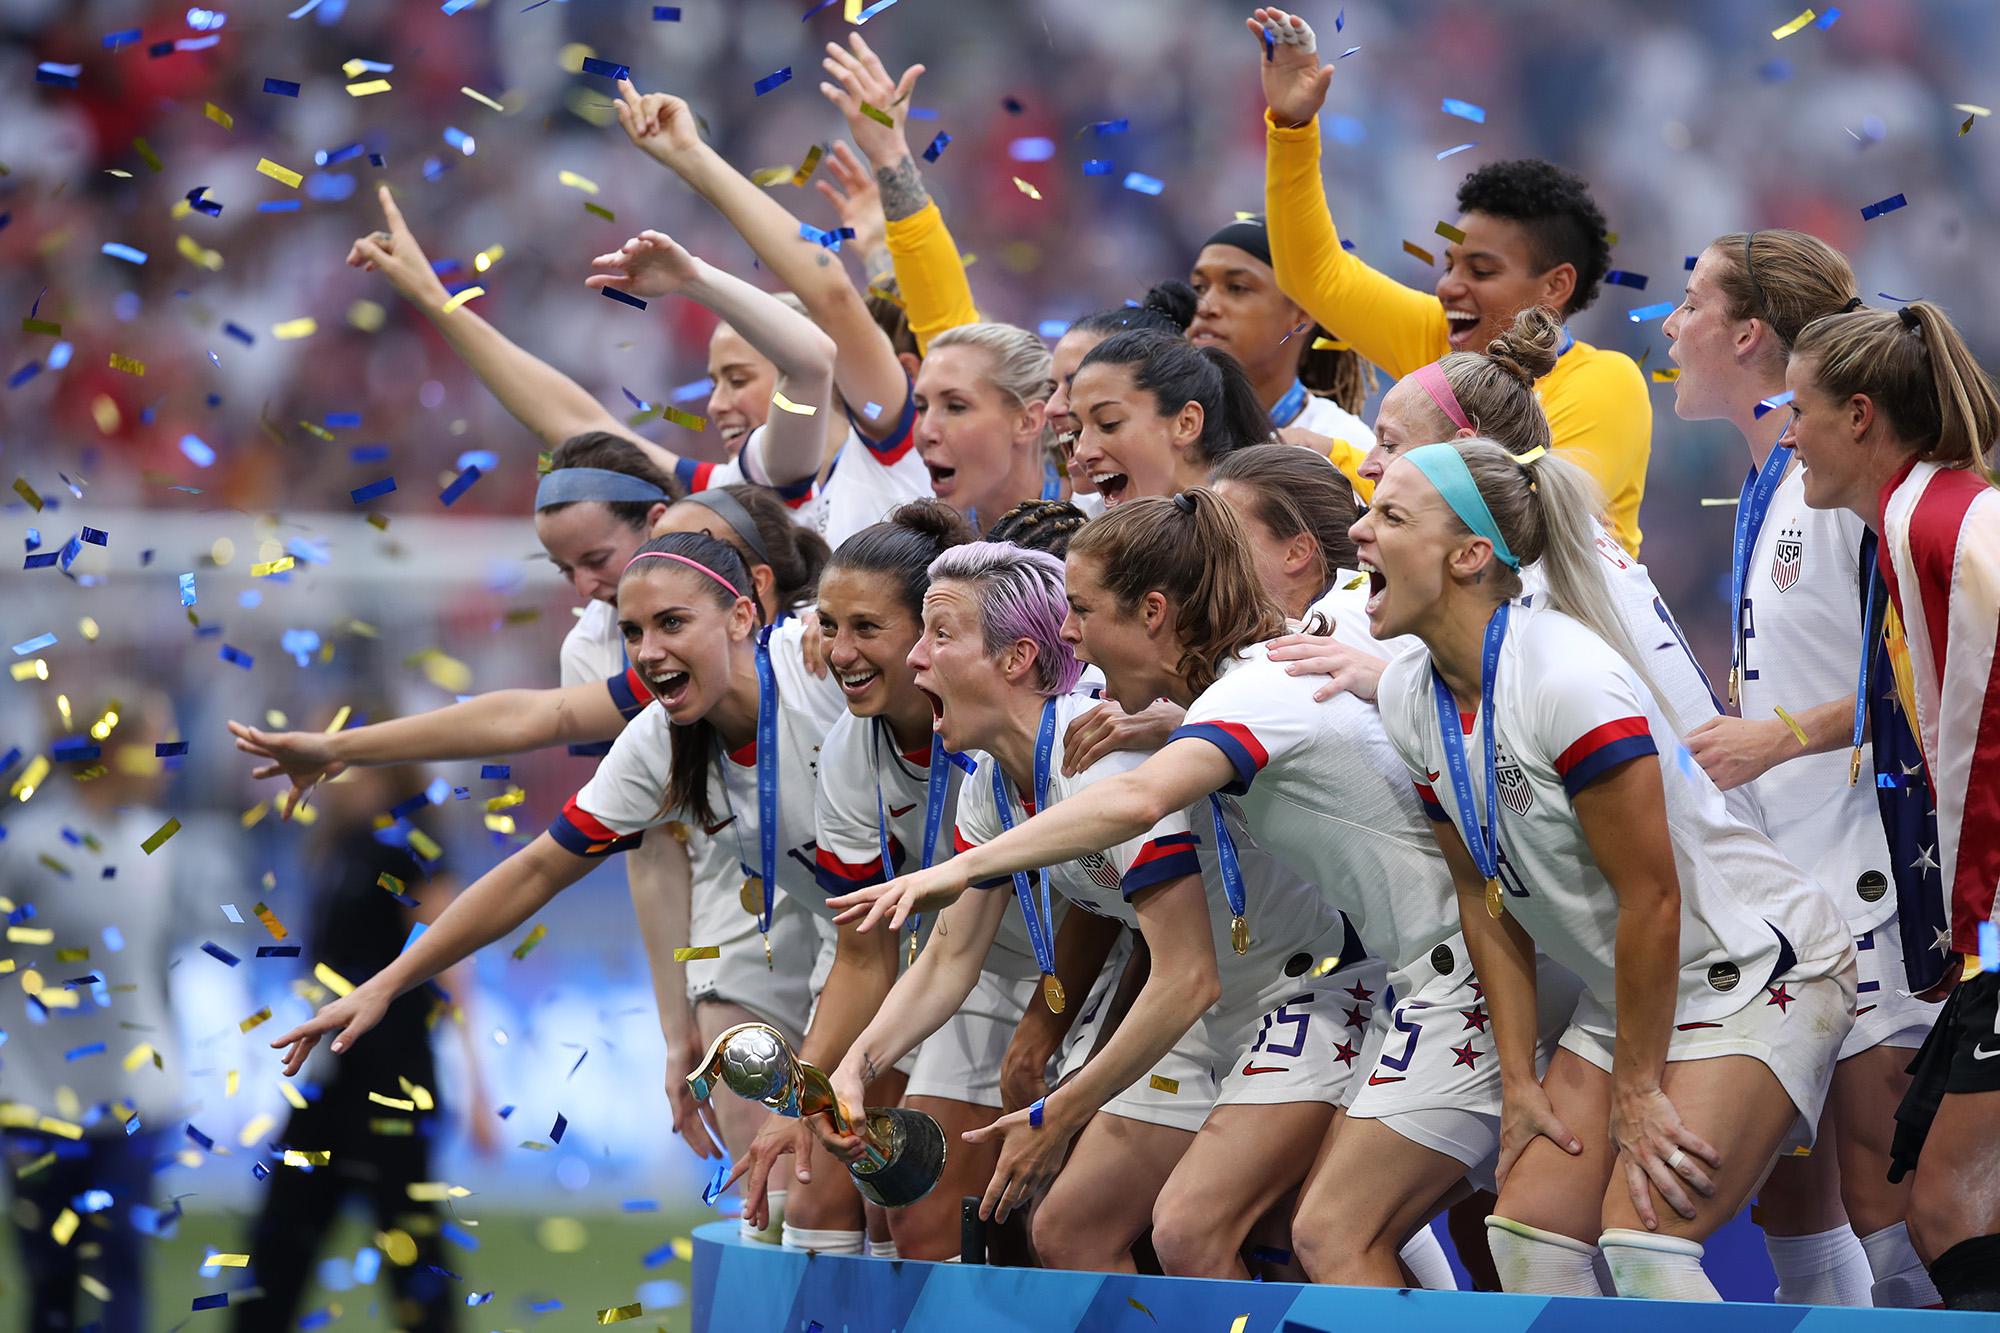 Why Should The Women’s Soccer Team Settle For Equal Pay